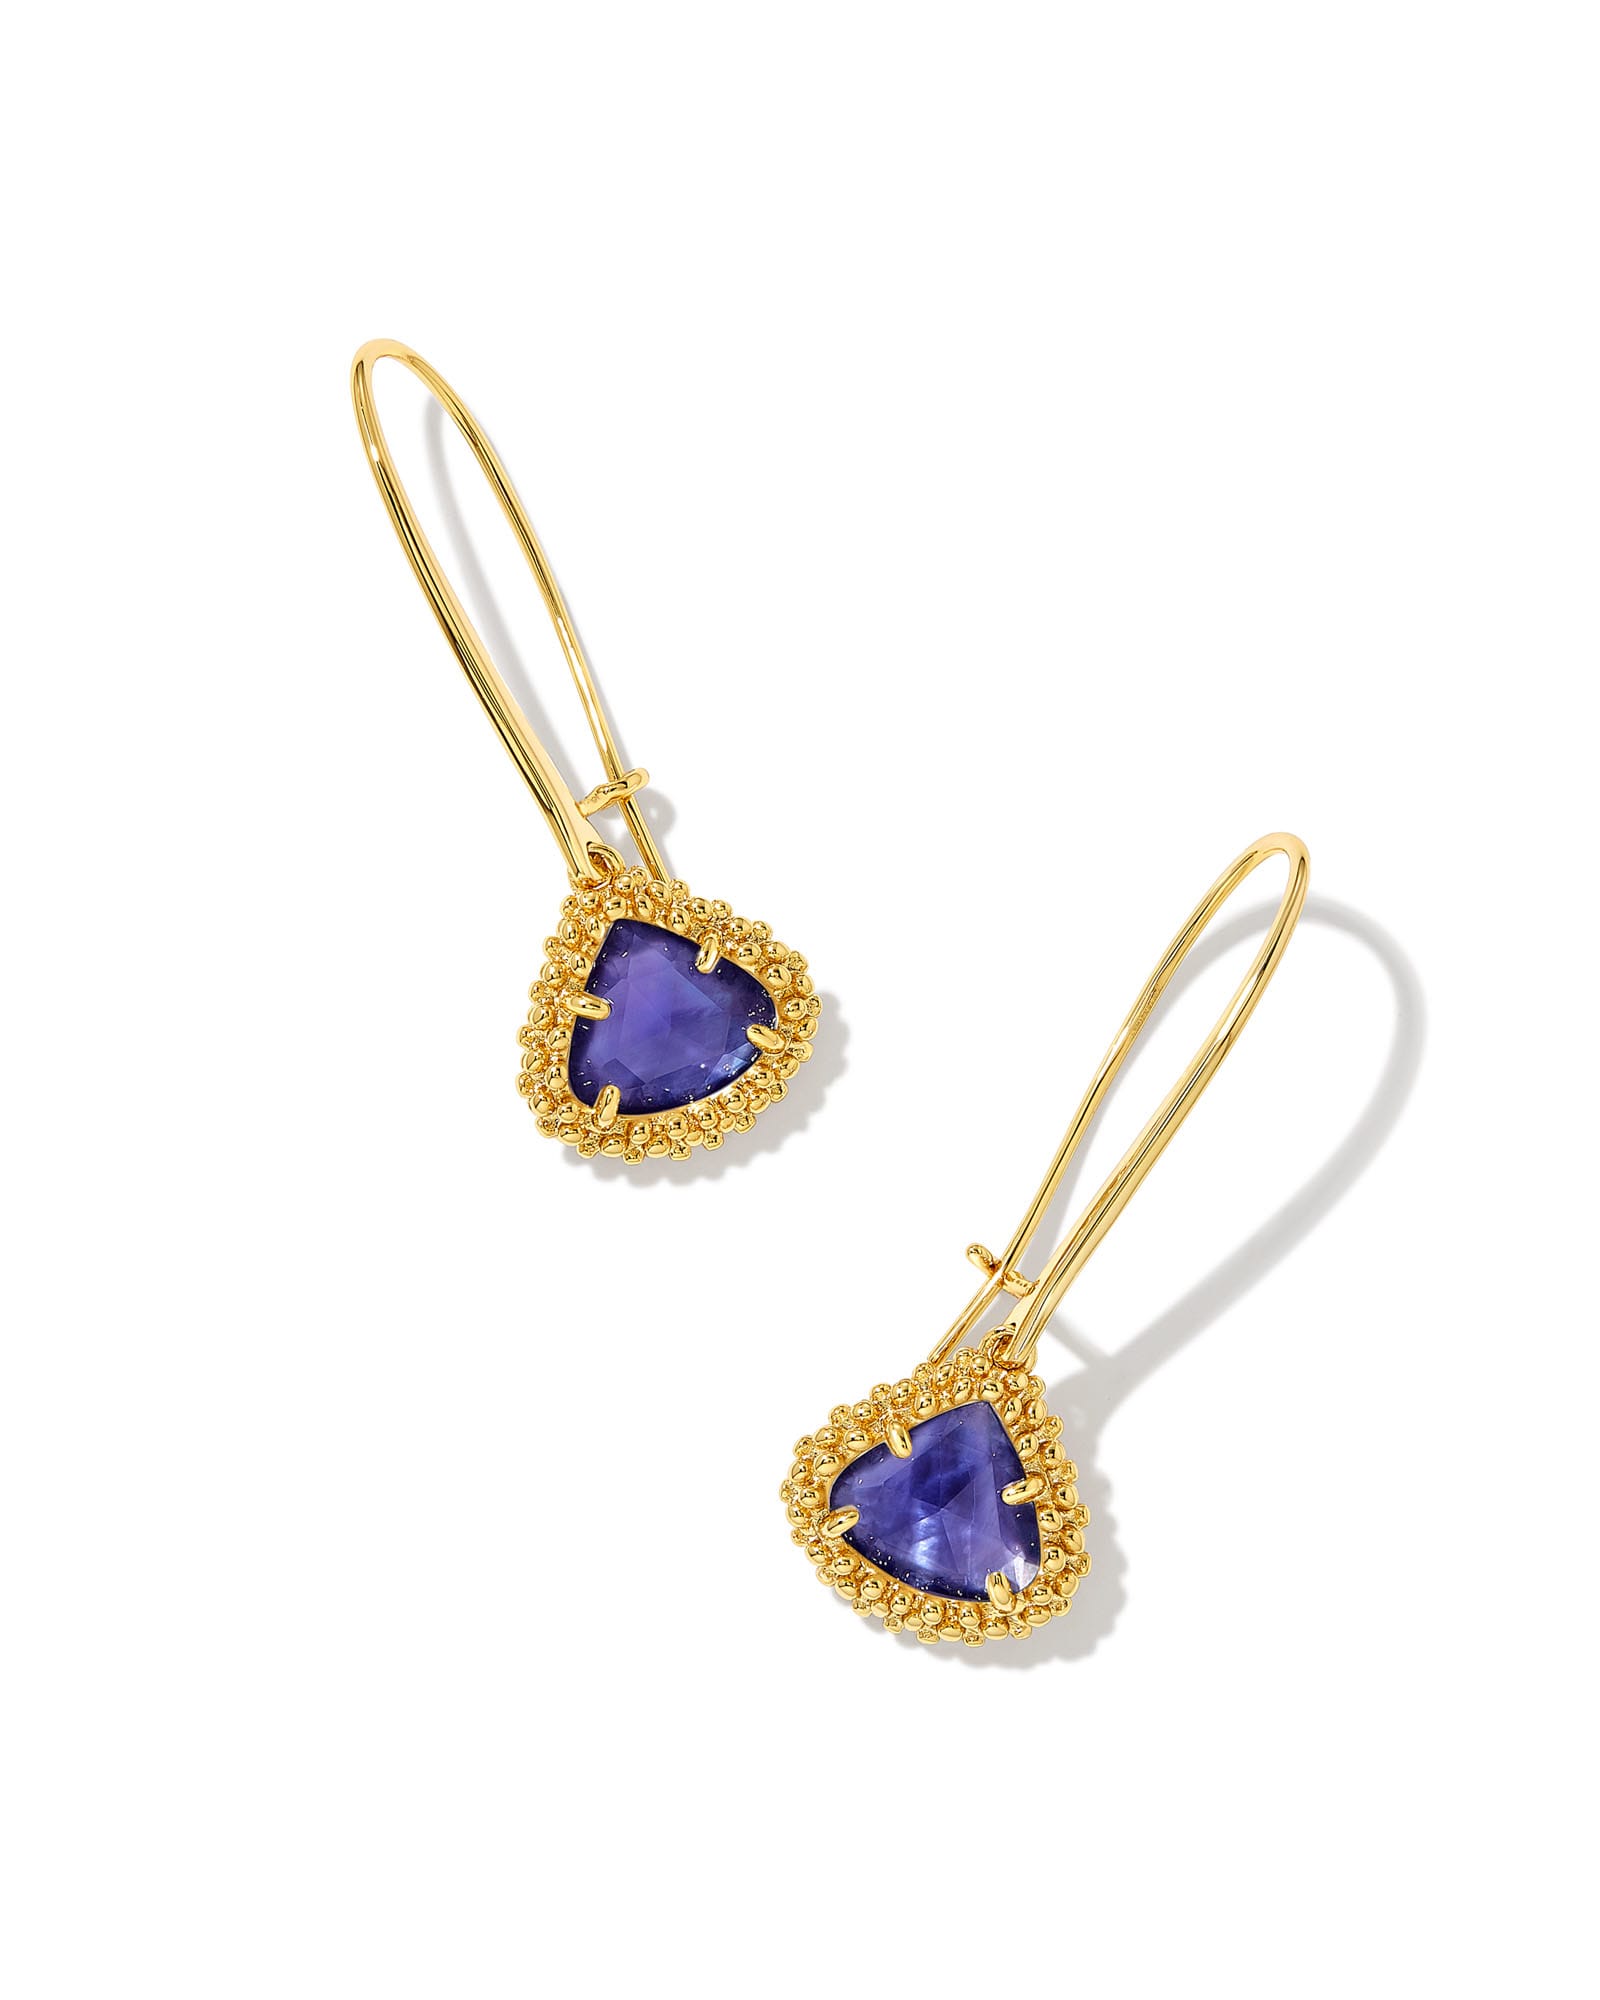 Framed Kendall Gold Wire Drop Earrings in Dark Lavender Illusion